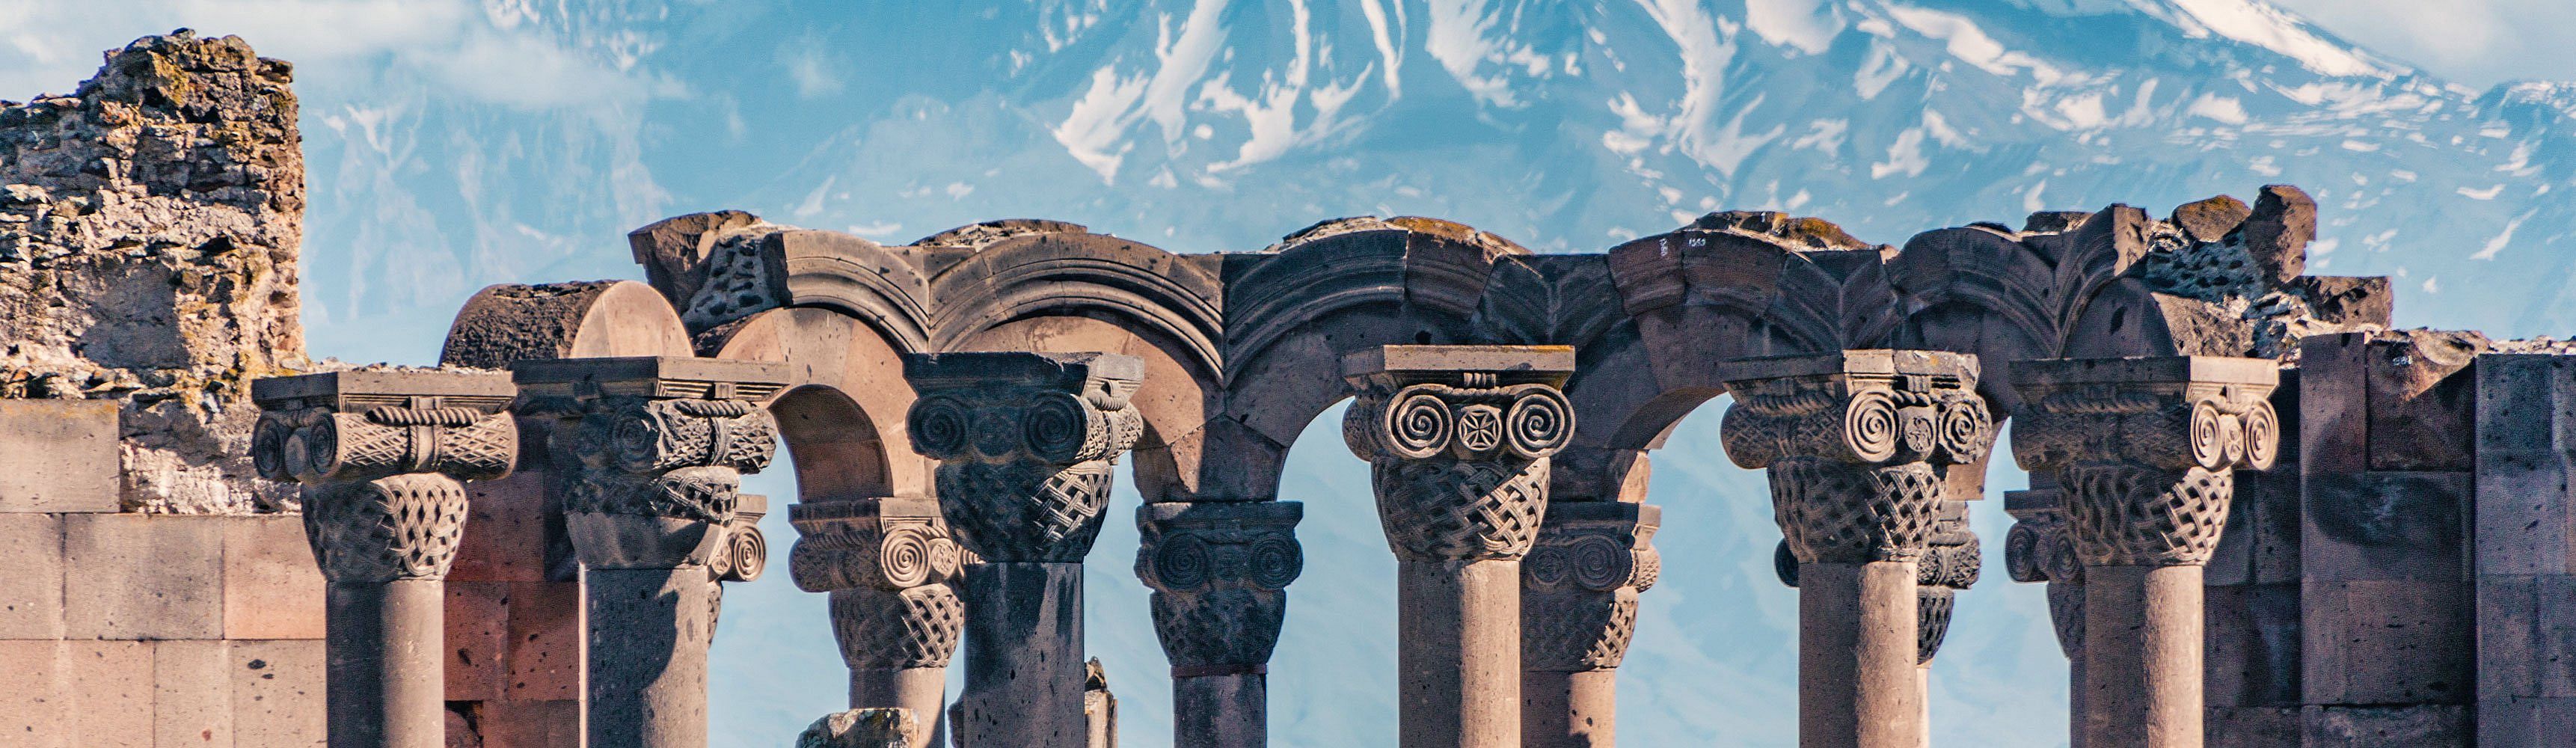 History and heritage in Armenia